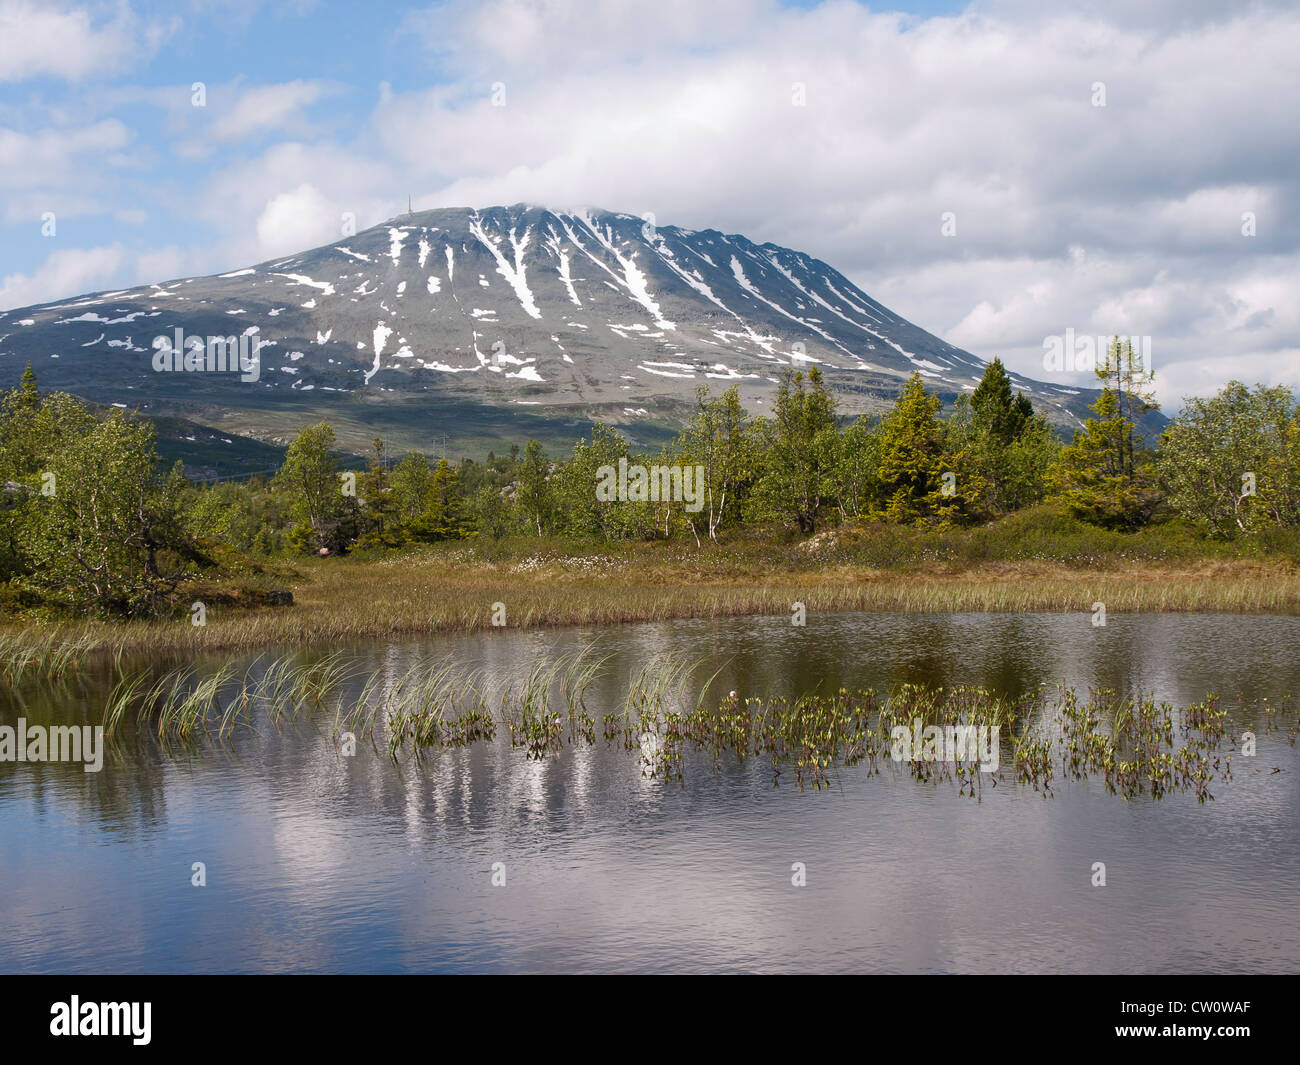 Gaustatoppen mountain in southern Norway seen from below Stock Photo